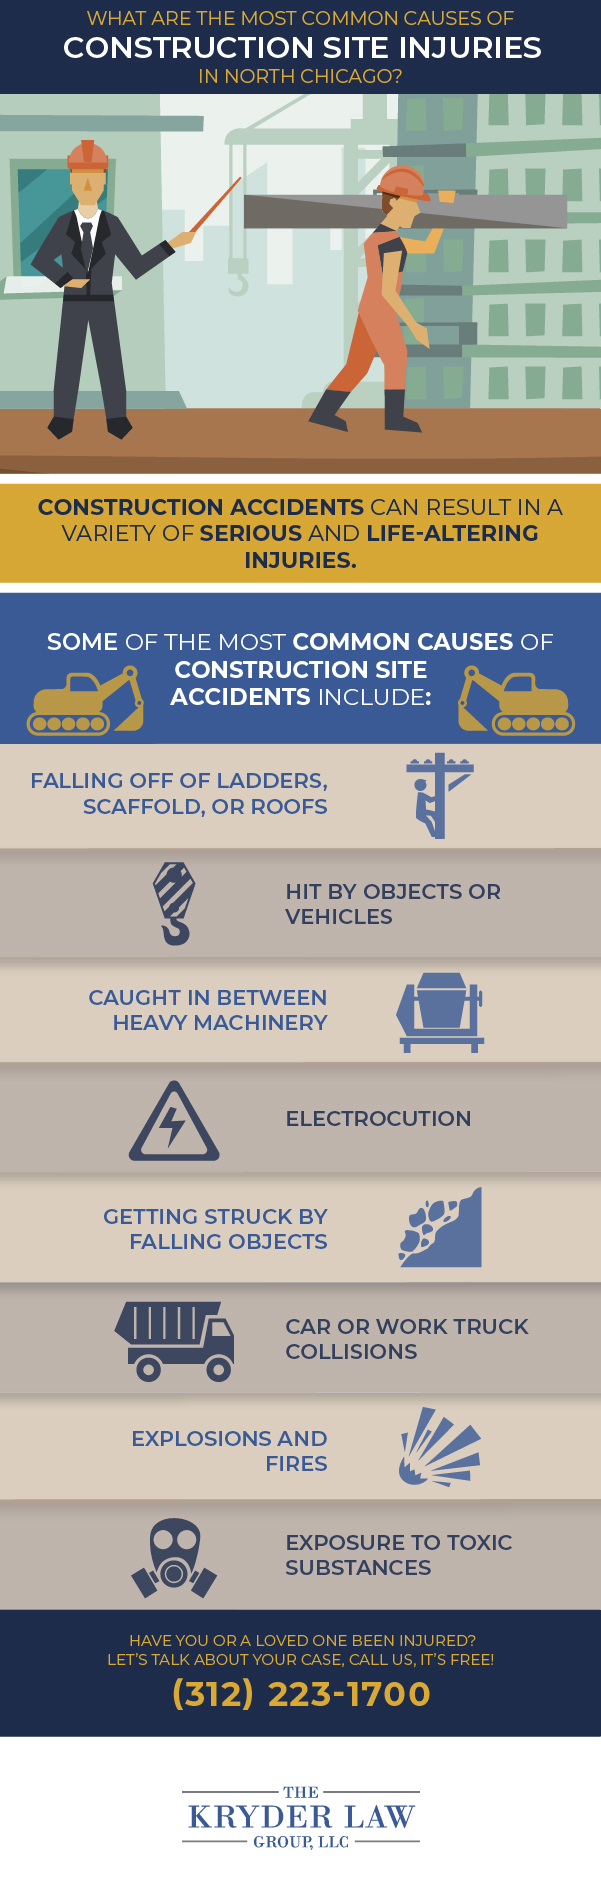 The Benefits of Hiring a North Chicago Construction Accident Lawyer Infographic